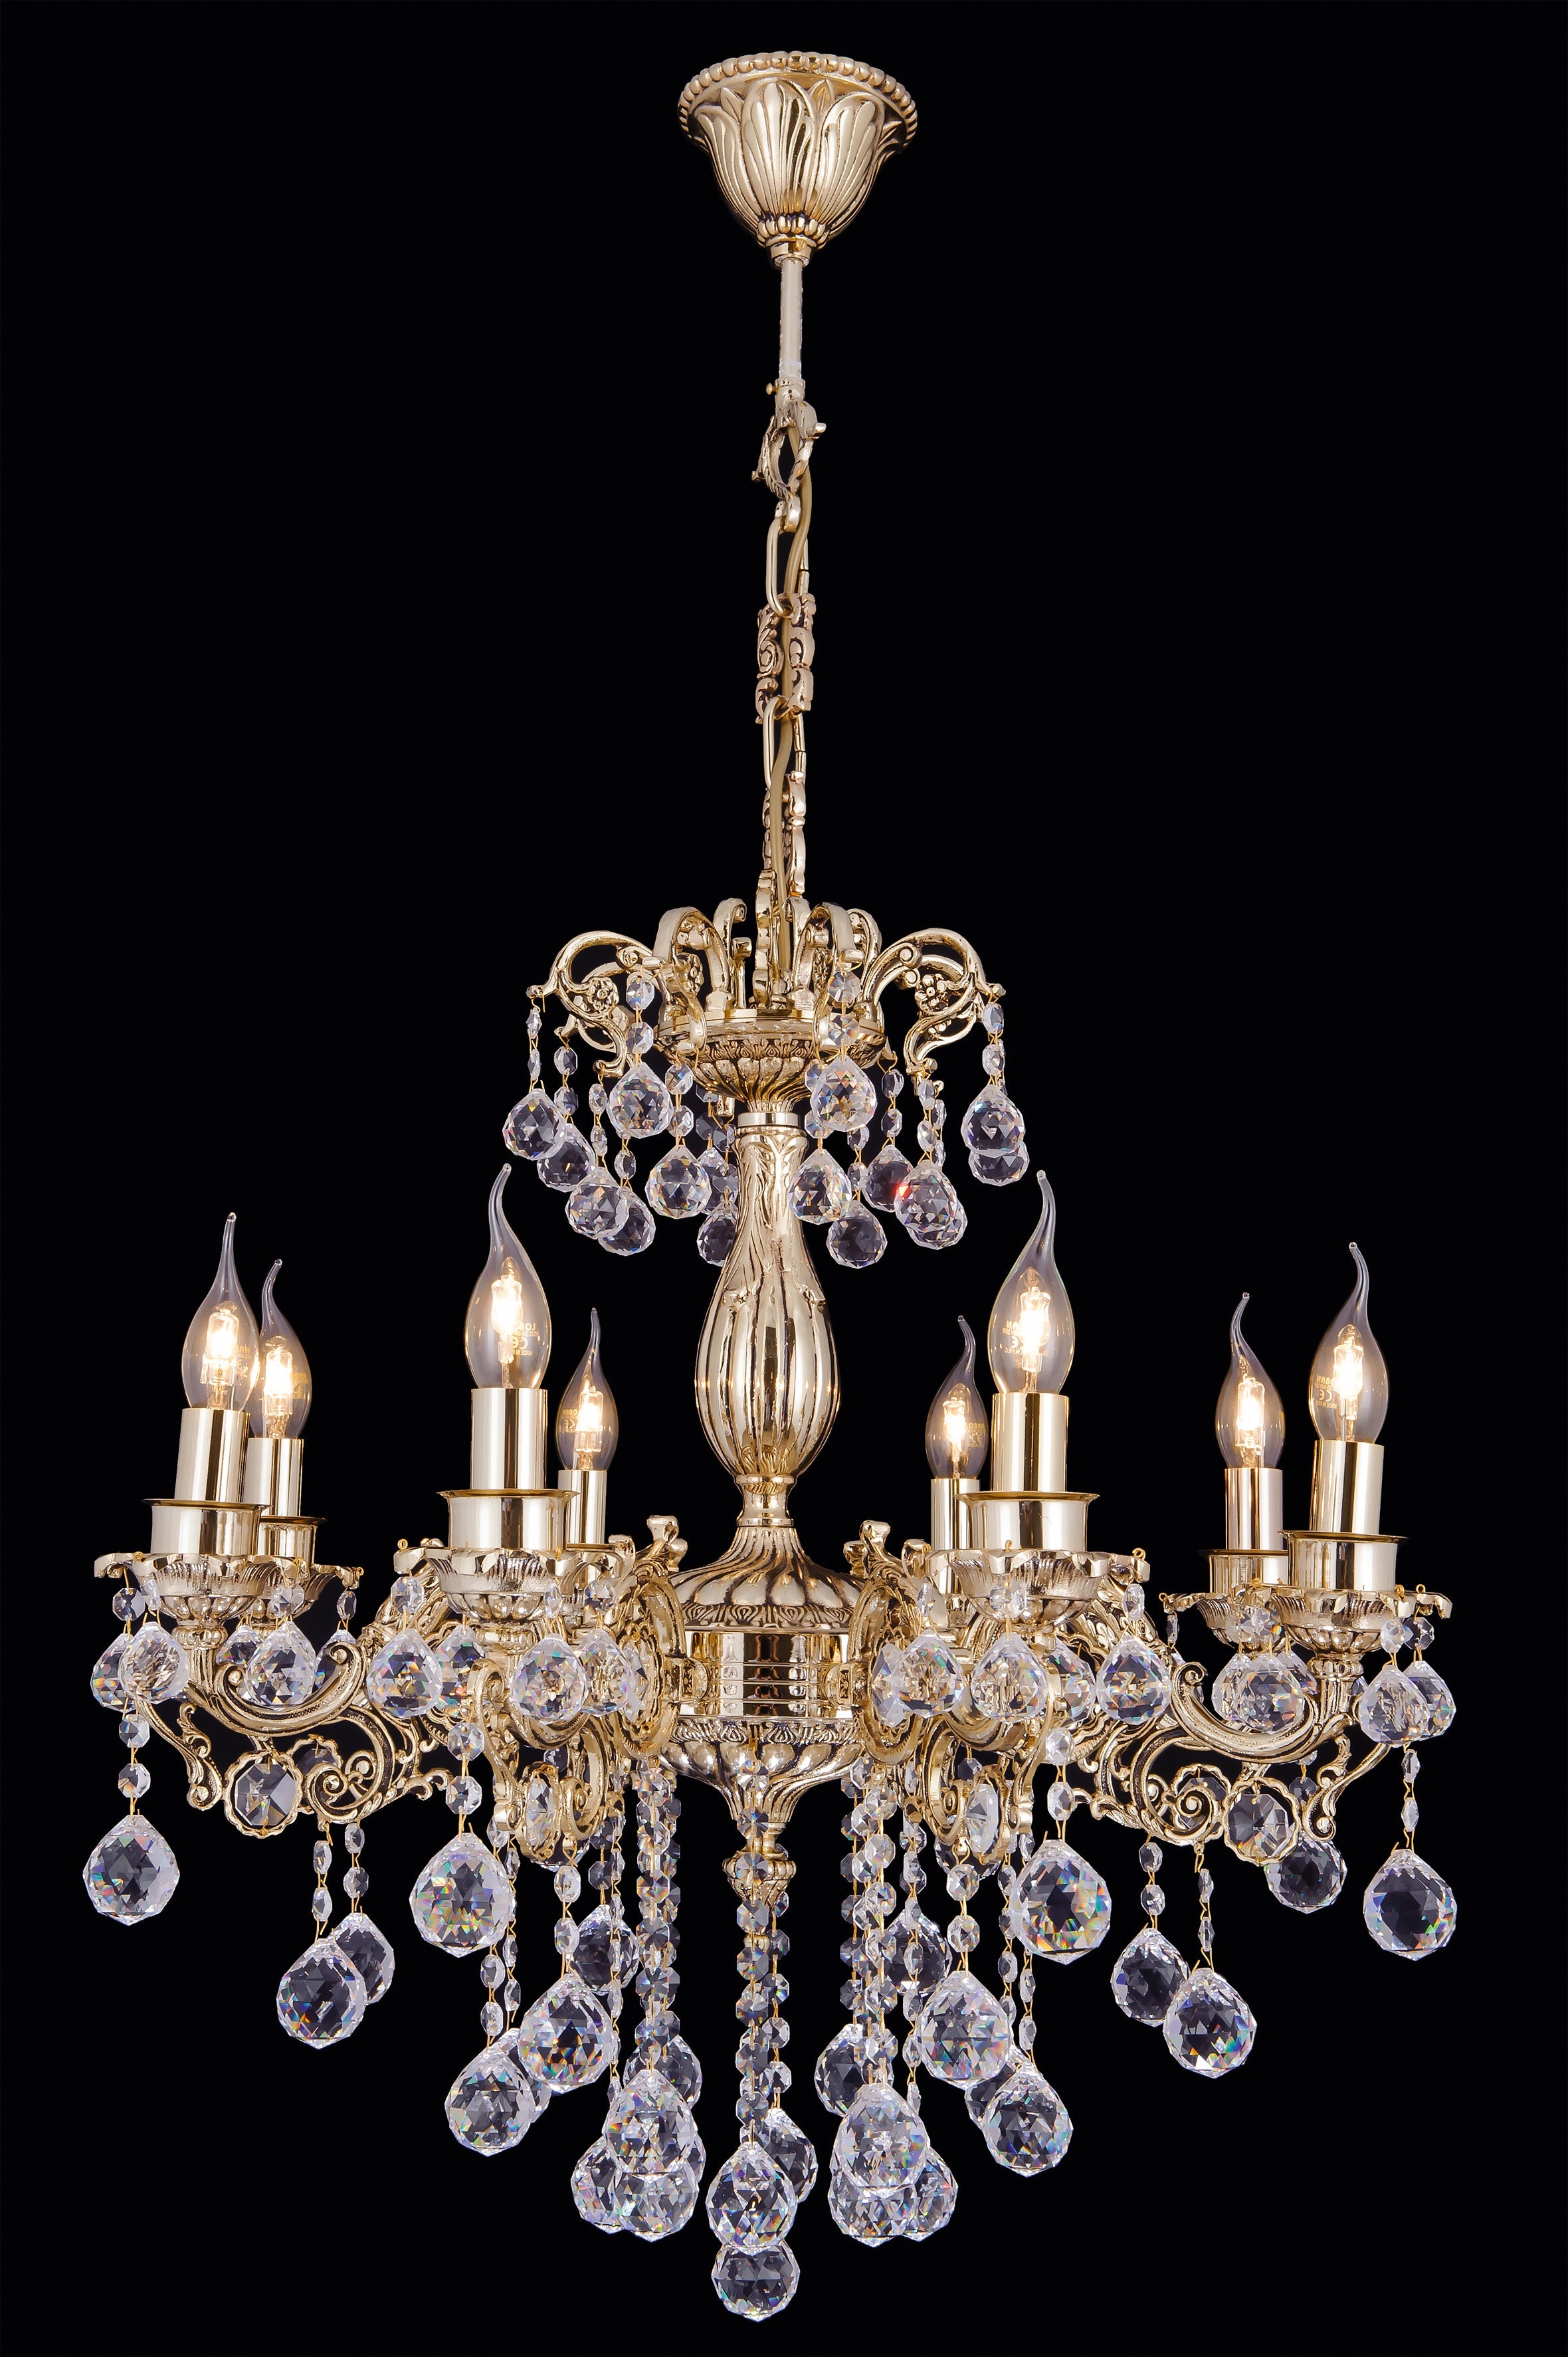 Palermo Prestige 8-Light Asfour Crystal Chandelier in Gold Finish